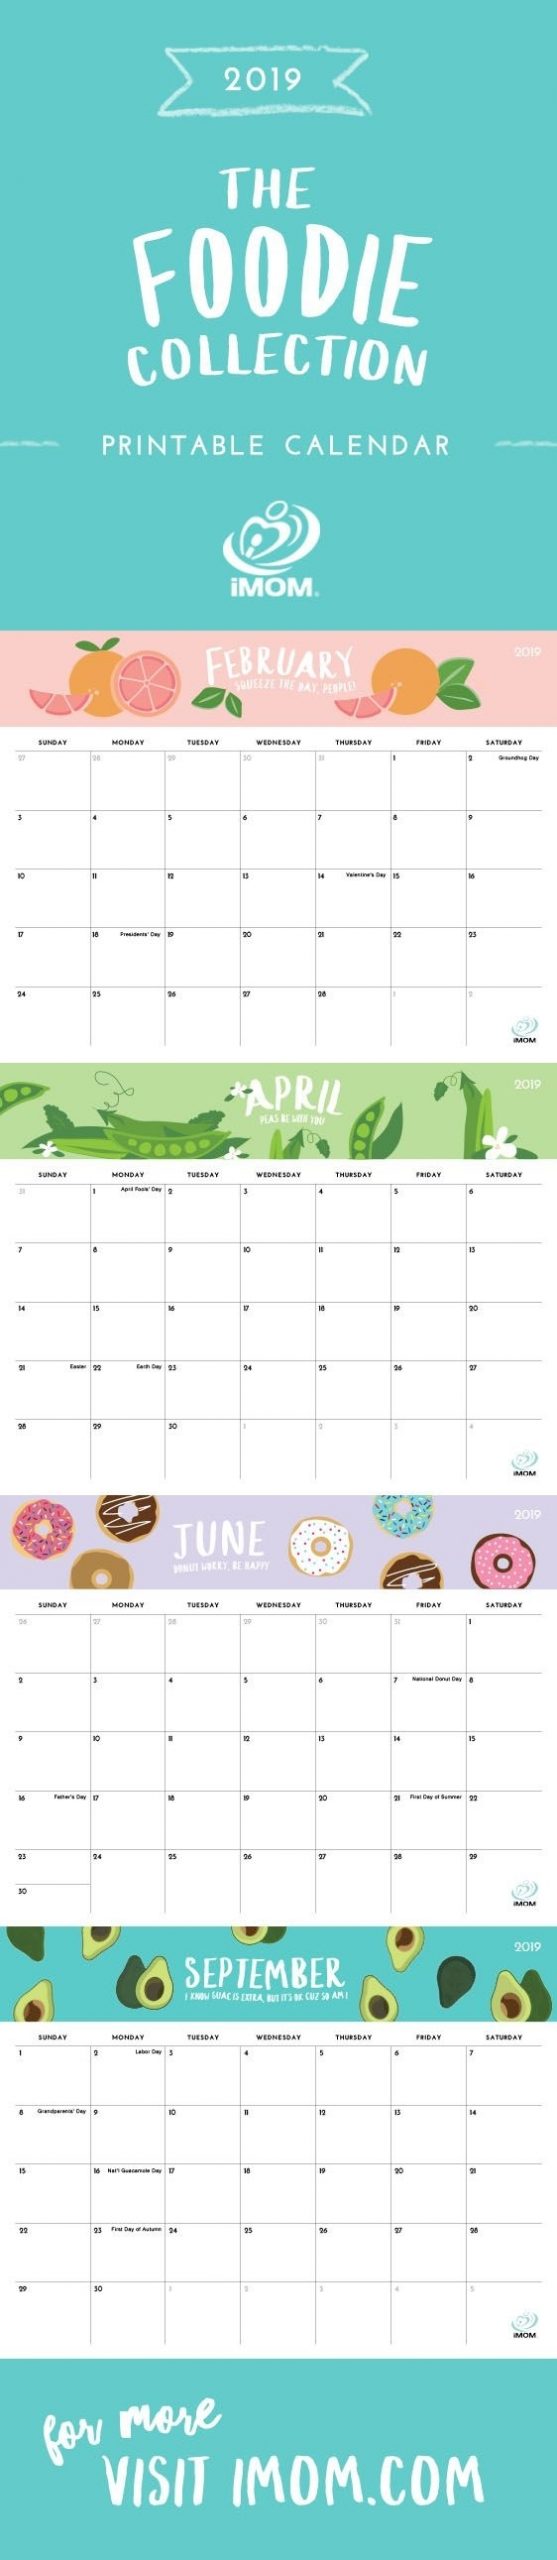 2020 And 2021 Foodie Printable Calendars For Moms - Imom